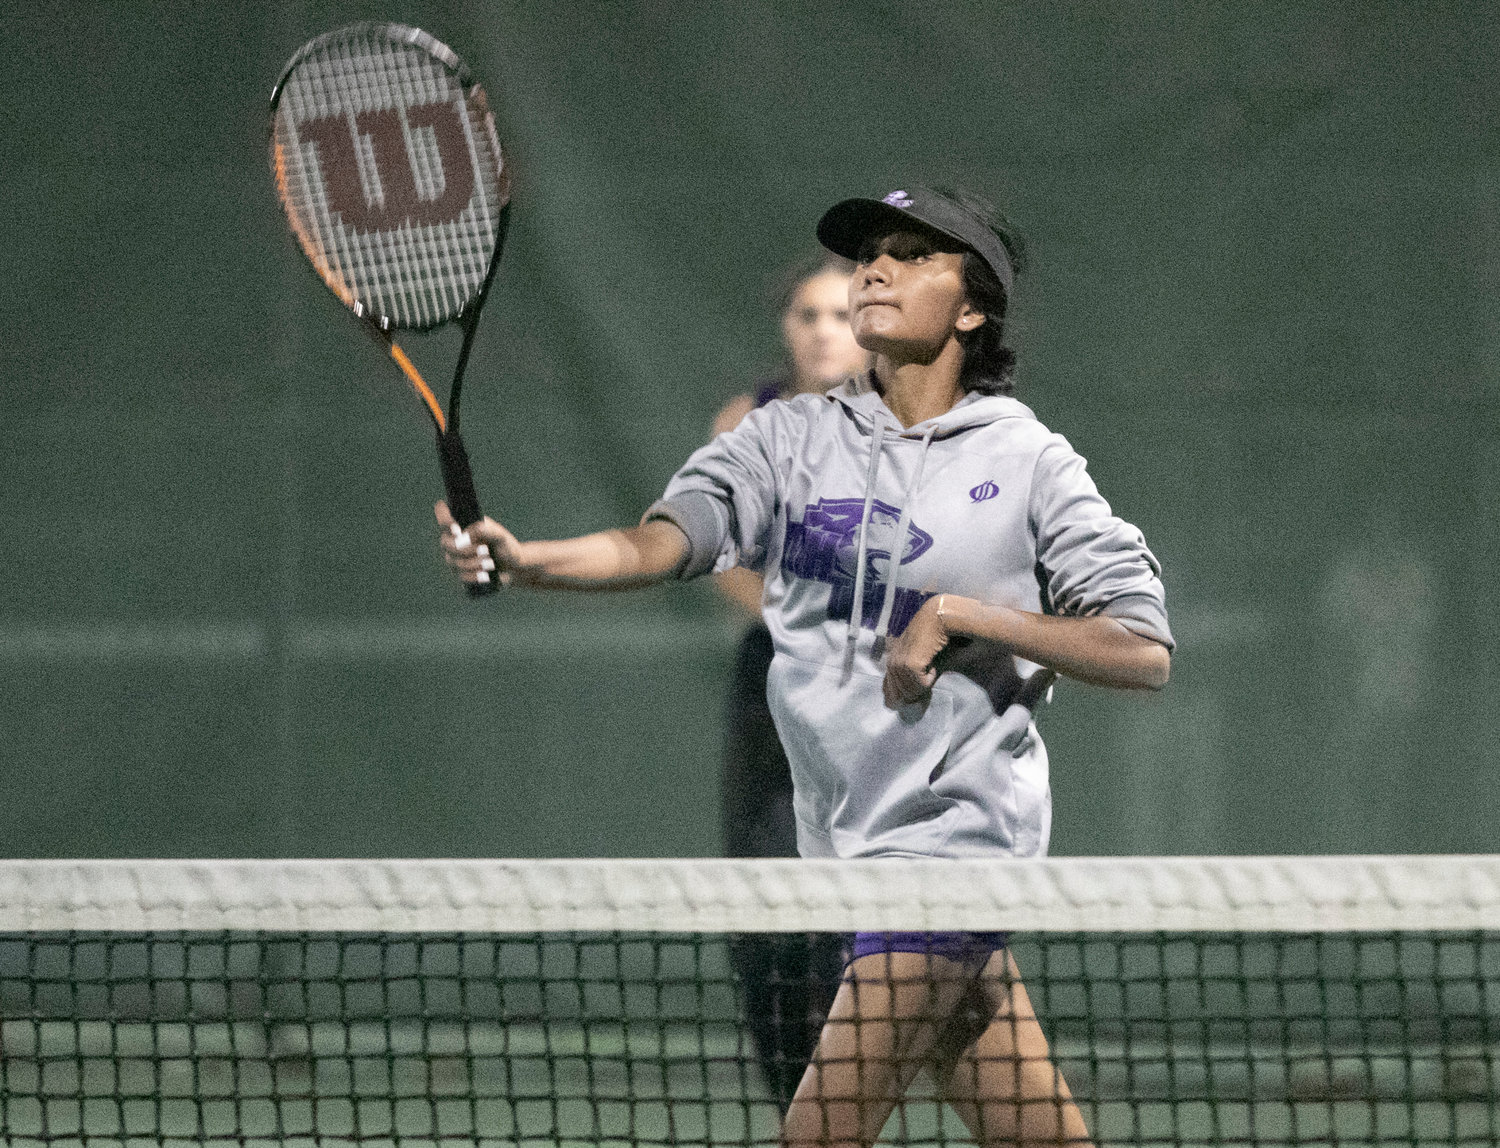 Aditi Mehta slams a shot by her opponents for a winner in the second set of the first doubles match.